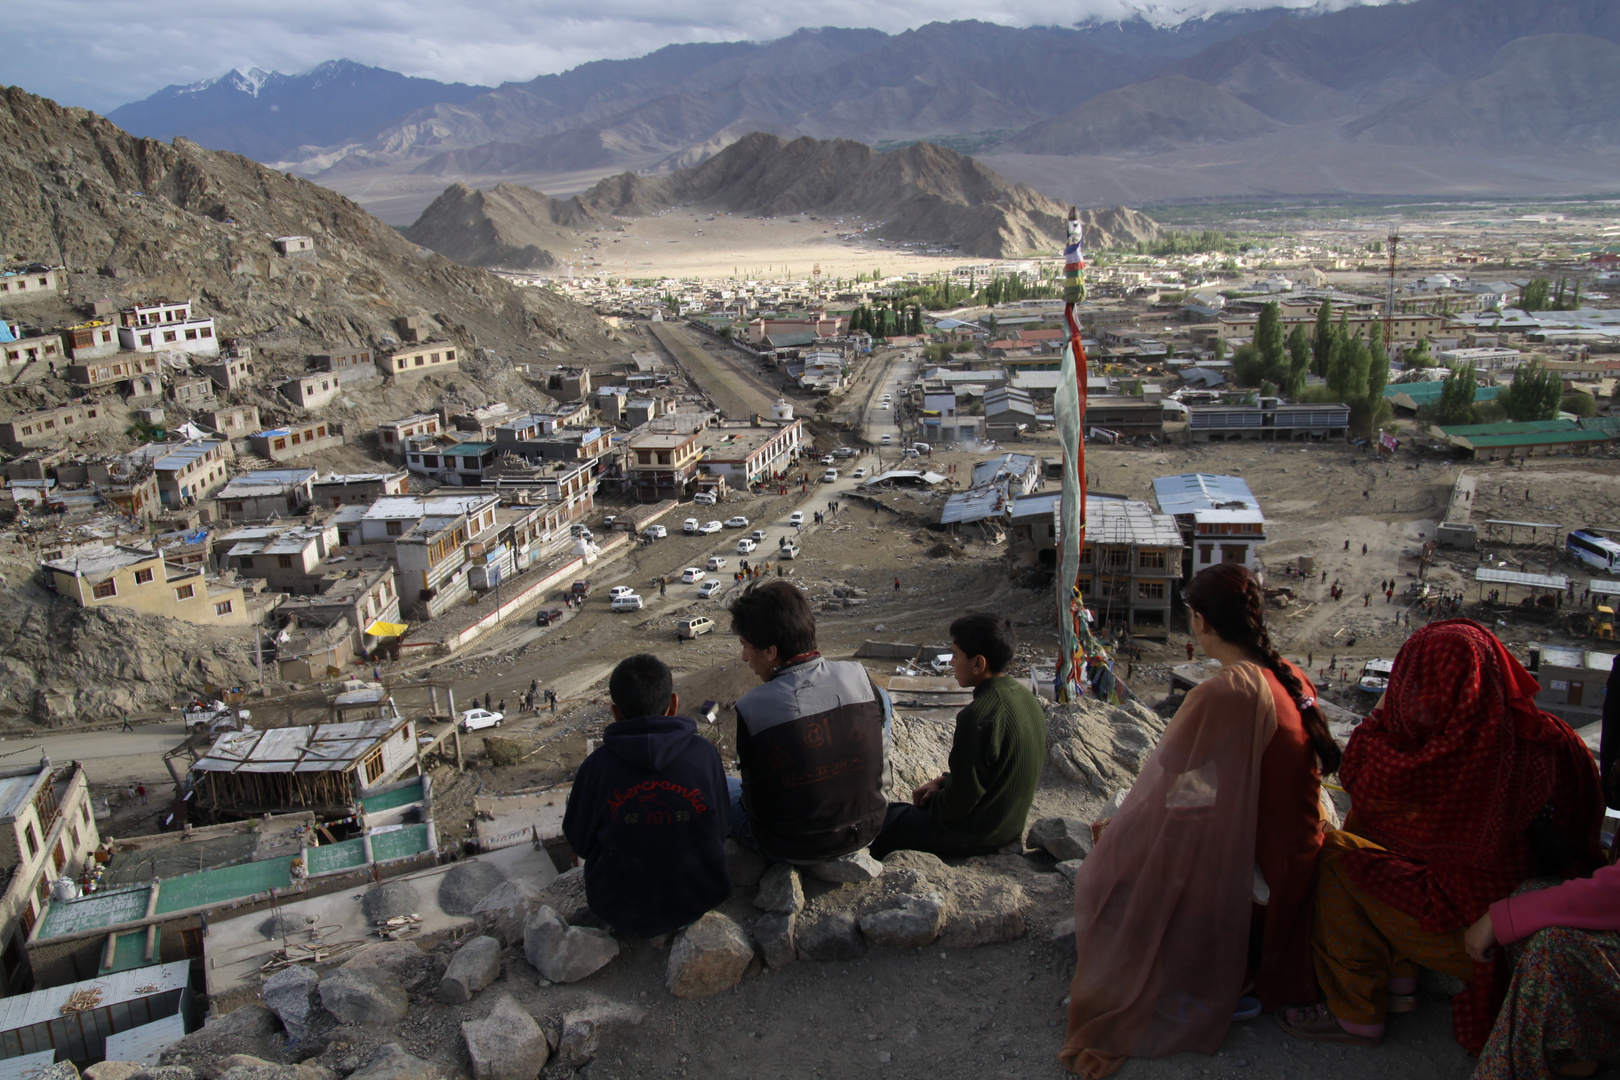 Leh: Watching the flood disaster from distance